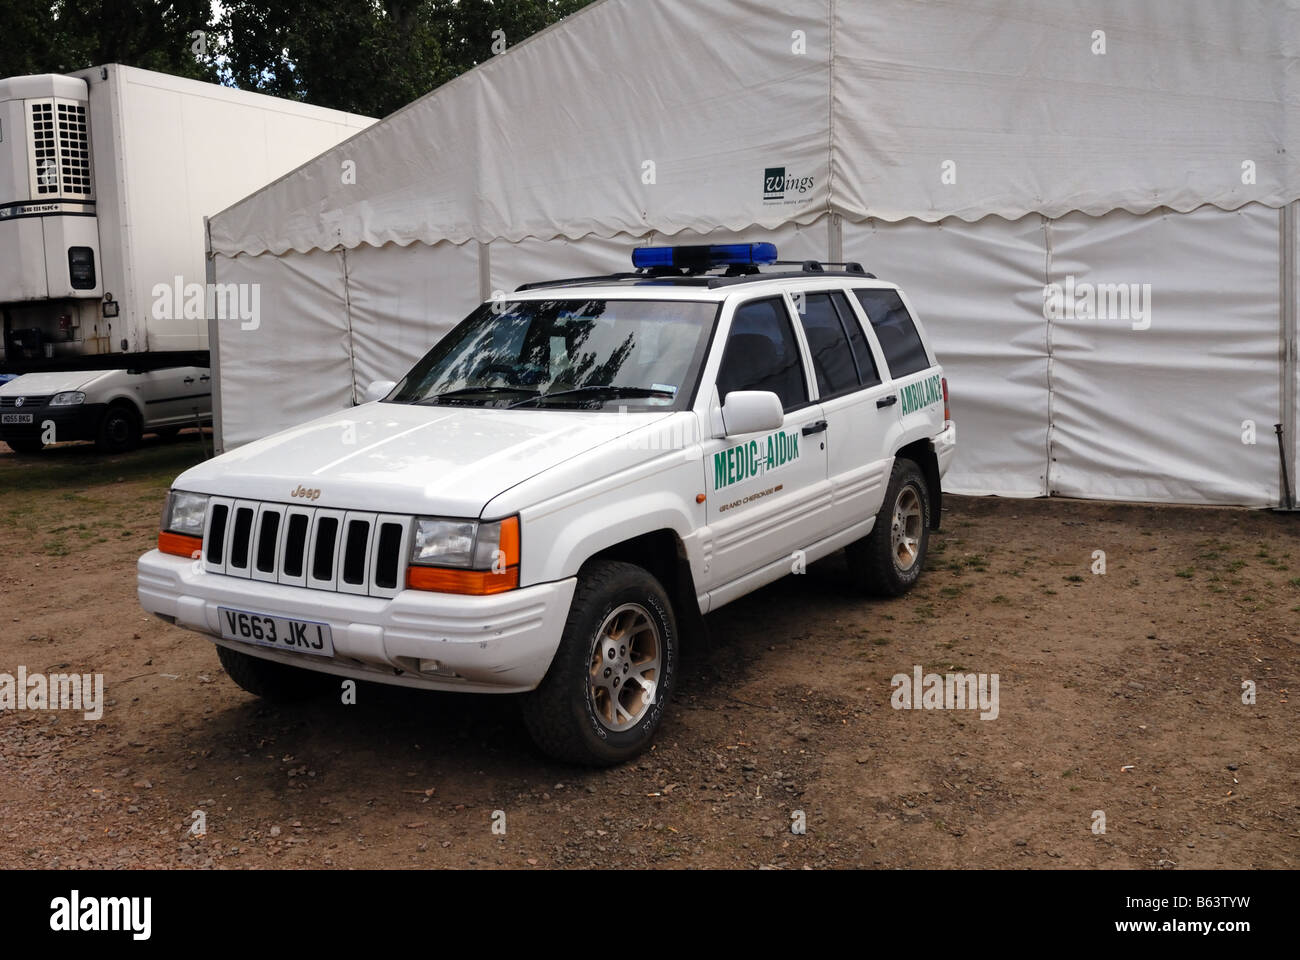 White Chrysler Jeep Grand Cherokee Limited used as an ambulance Registration Number V663 JKJ Medic Aiduk 4WD four wheel drive Stock Photo